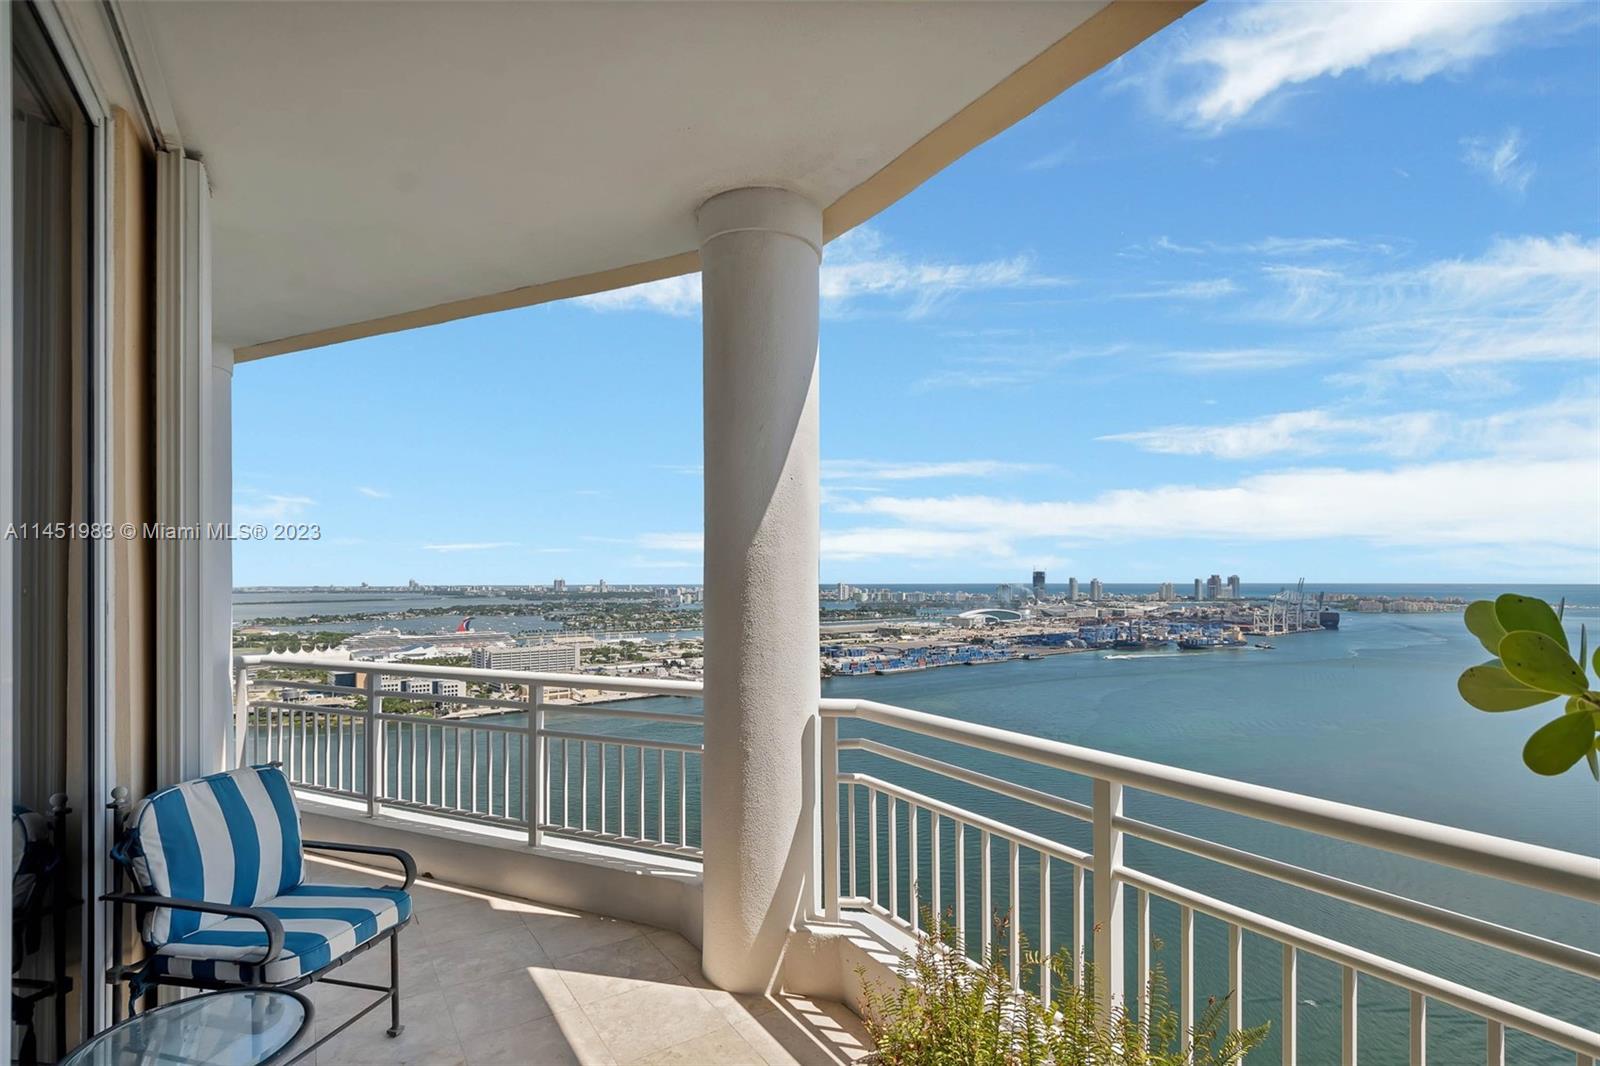 Impressive Pre Penthouse level corner unit. Soaring 10" high ceiling and sought after open railing balcony, Upgraded kitchen and bathroom. Majestic Views of the Bay, Ocean and Miami's Magic Skyline!
Three assigned covered parking spaces and one assigned storage included.
Sale subject to a Tenant in the Unit until January 31, 2024. Showings scheduled only on Fridays 12:30-2:30.